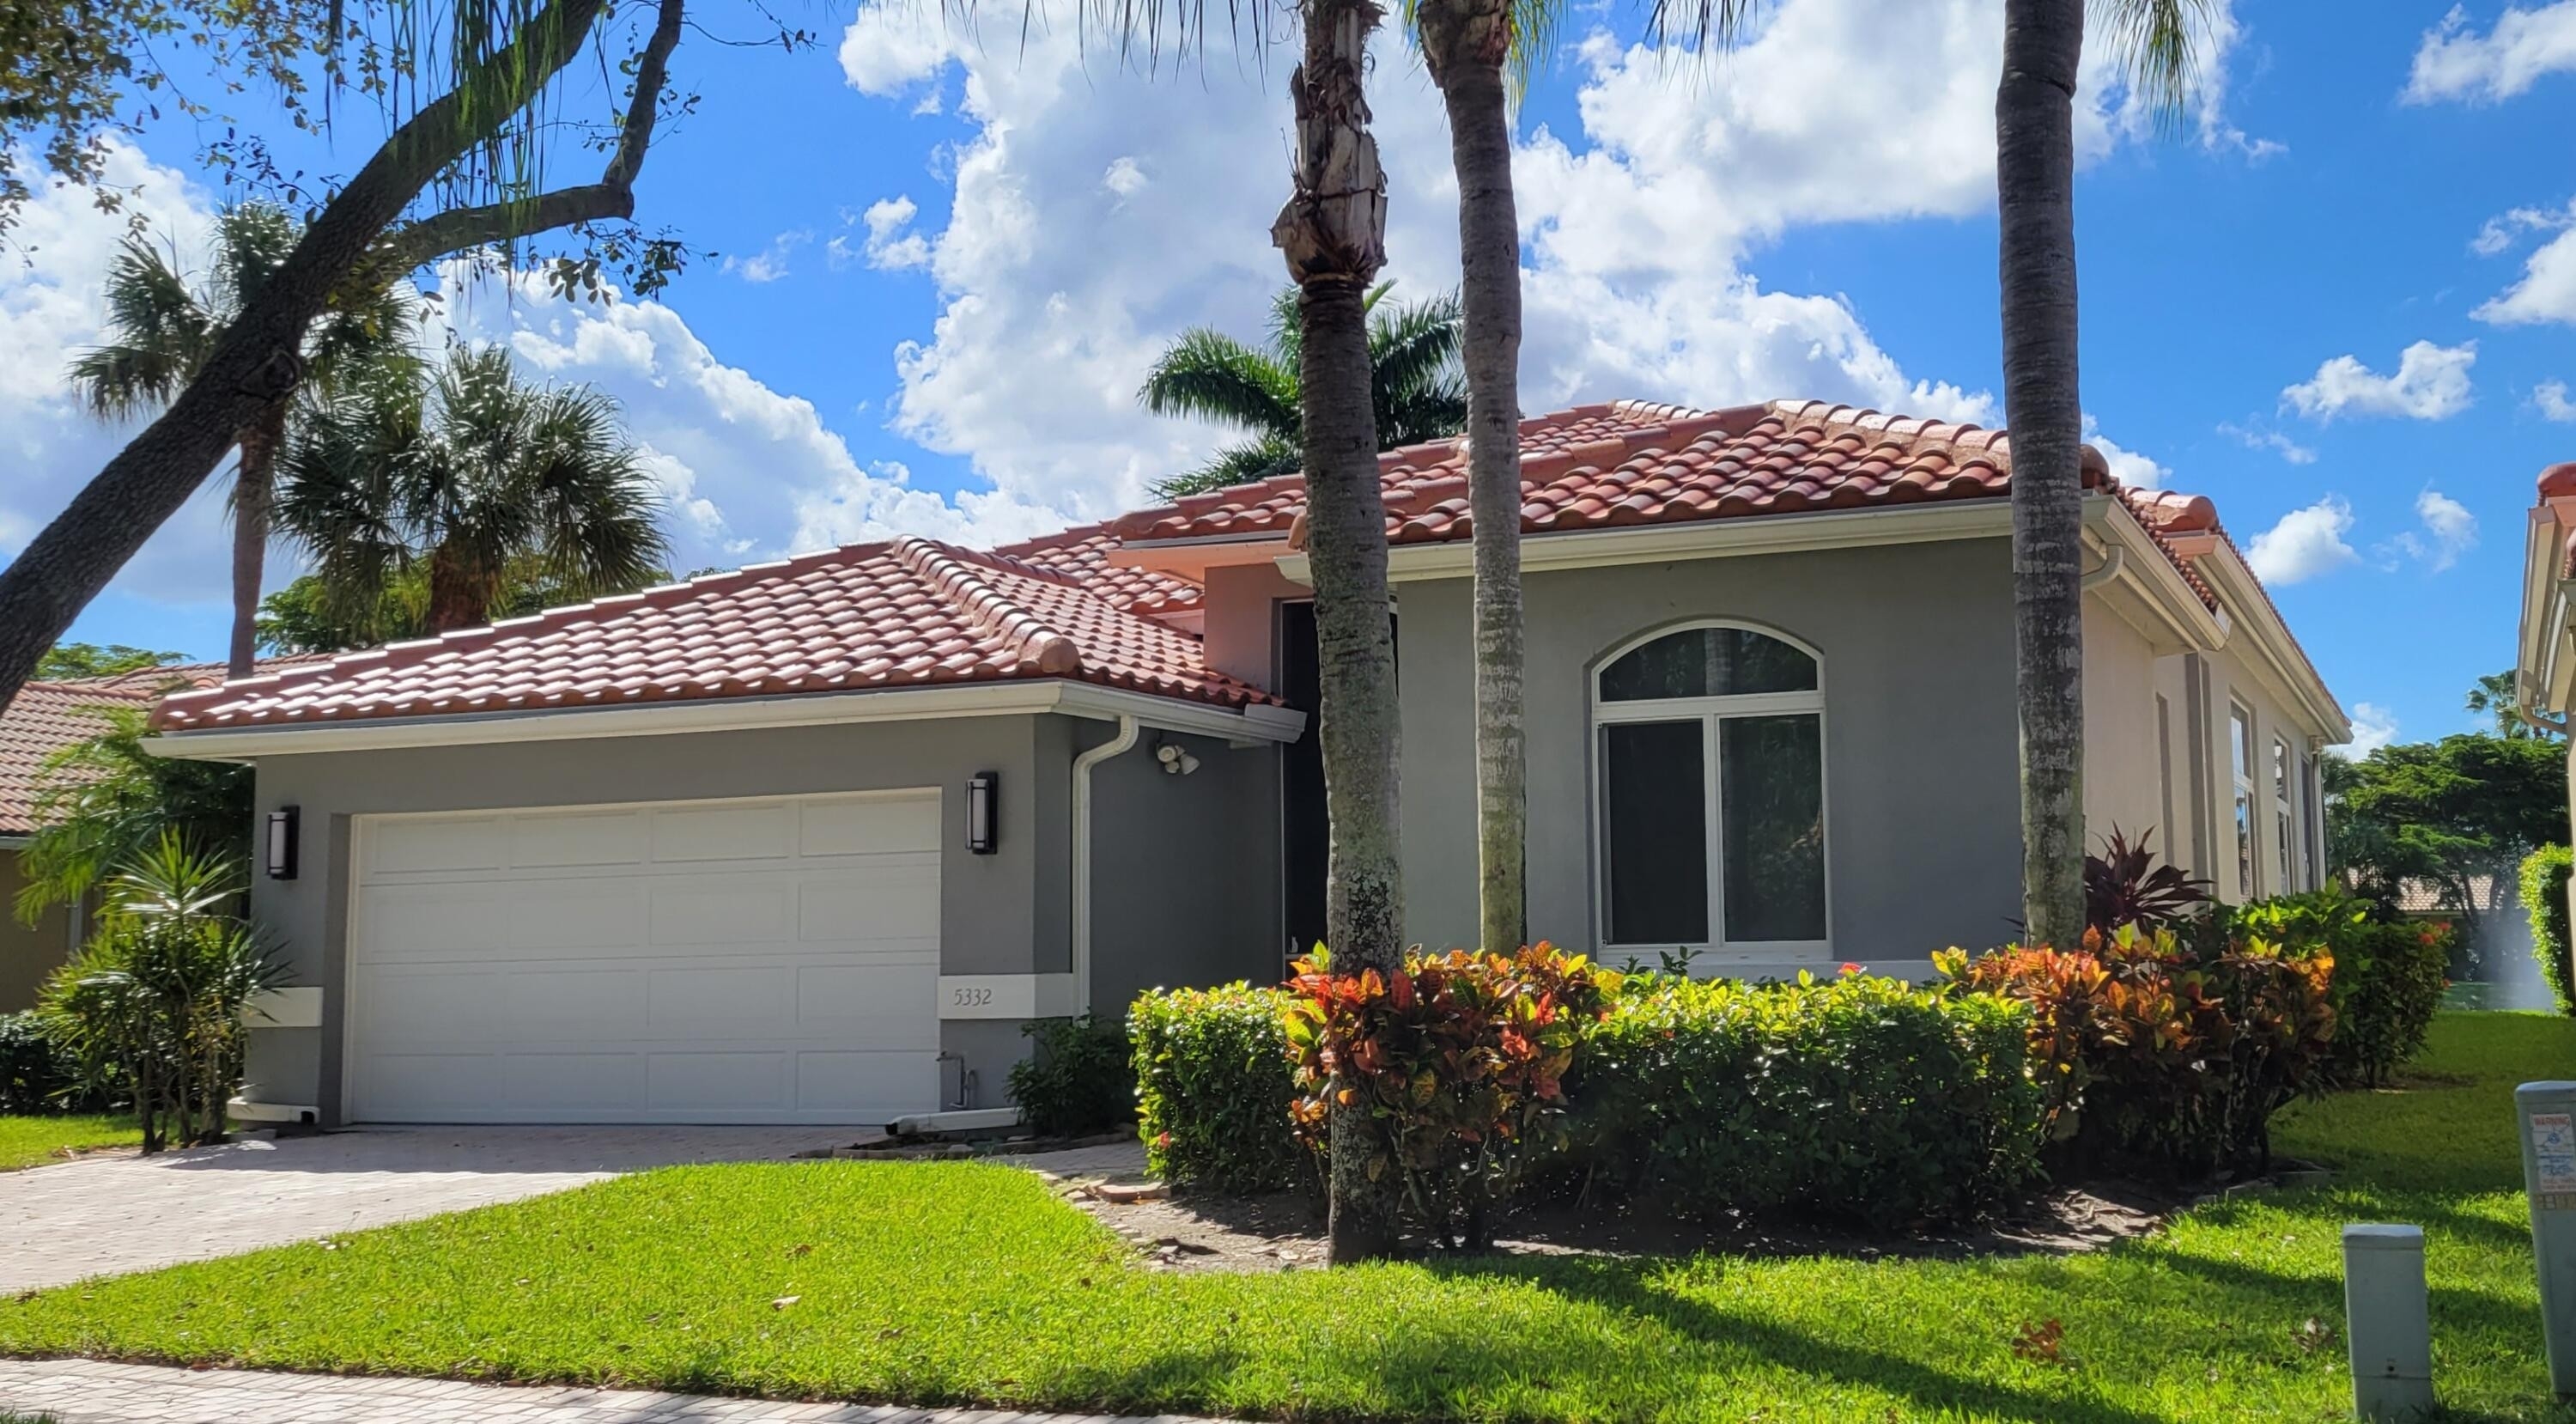 Single Family Home for Sale at Delray Beach, FL 33484